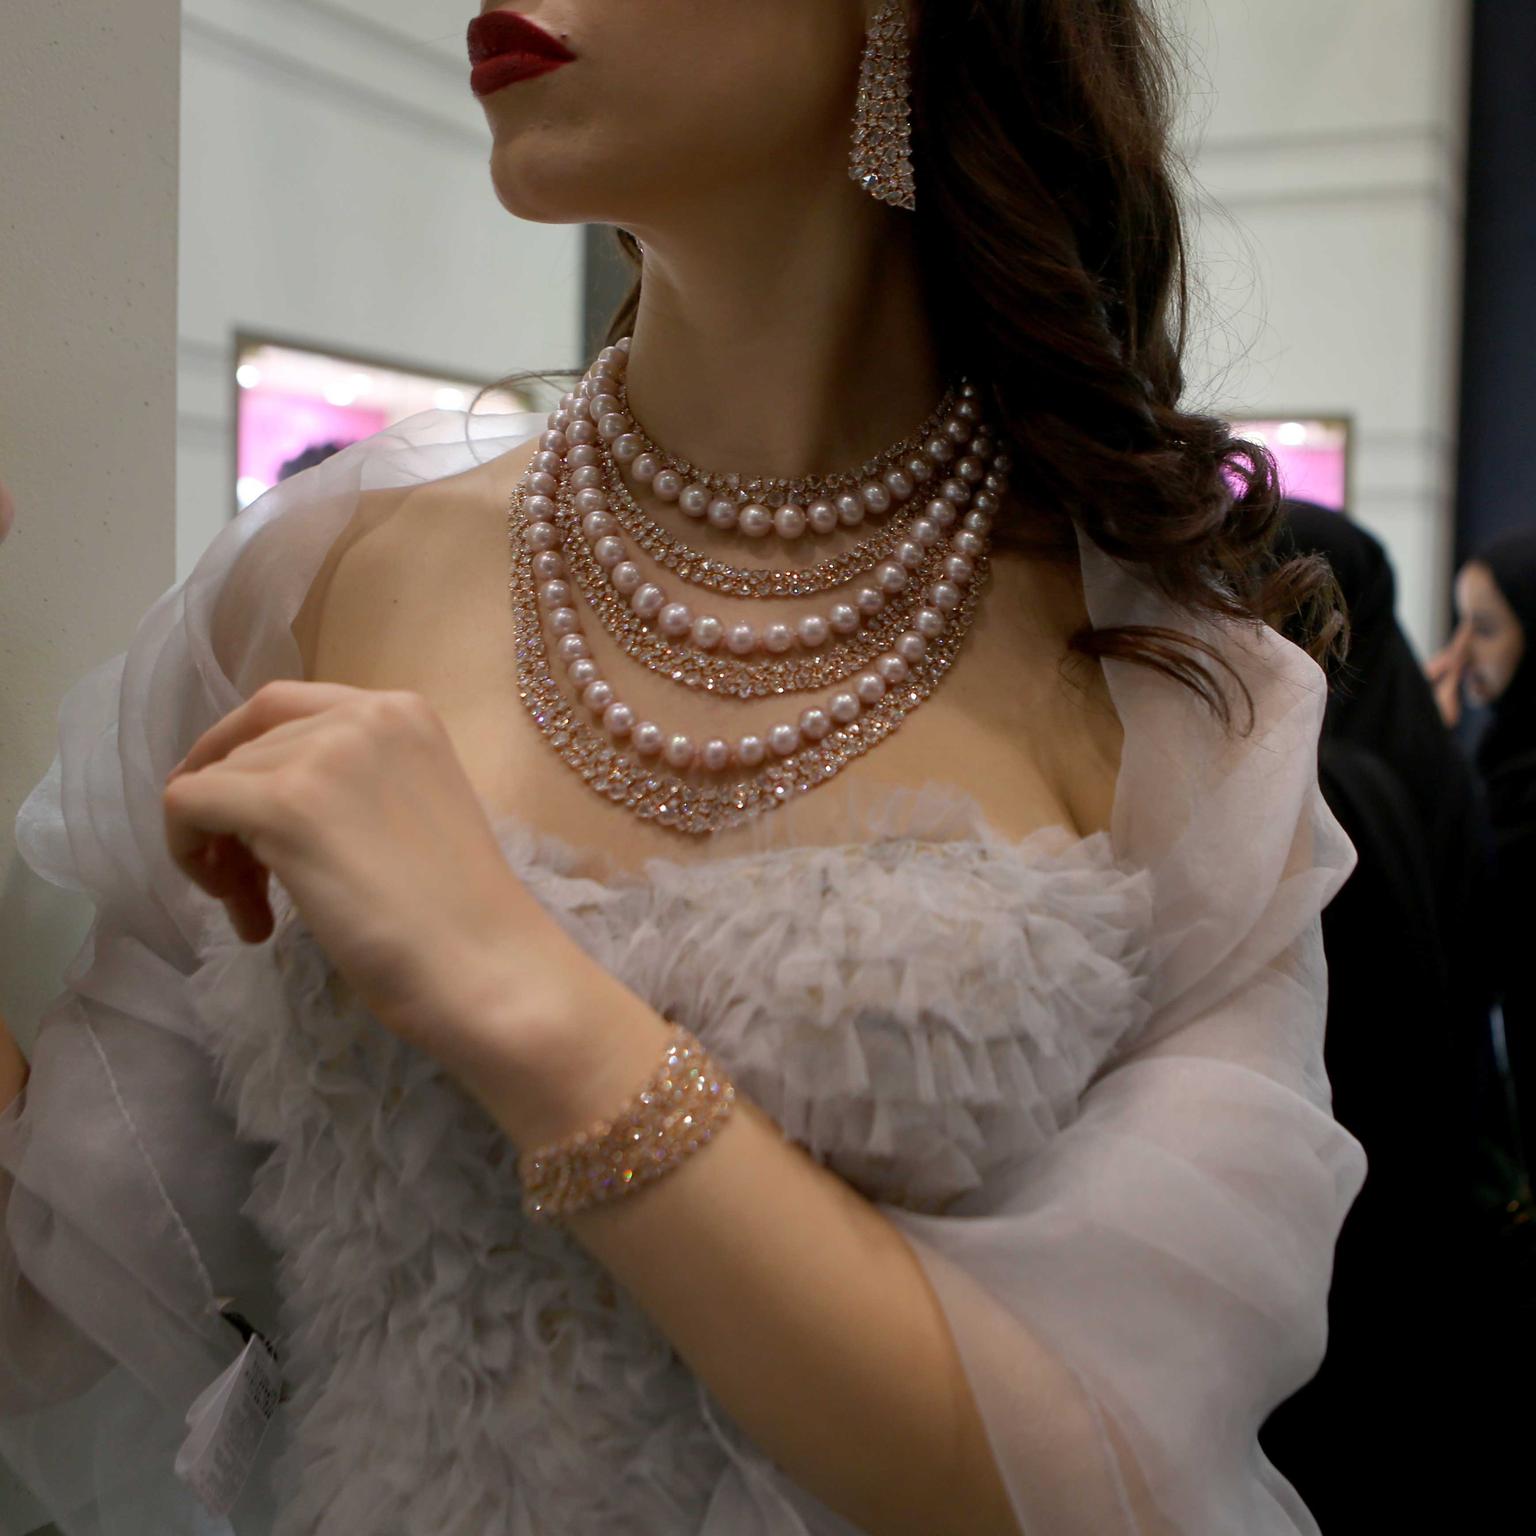 Pearls are a big draw at the Doha Jewellery and Watch Exhibition from brands such as Mikimoto to regional jewellers.